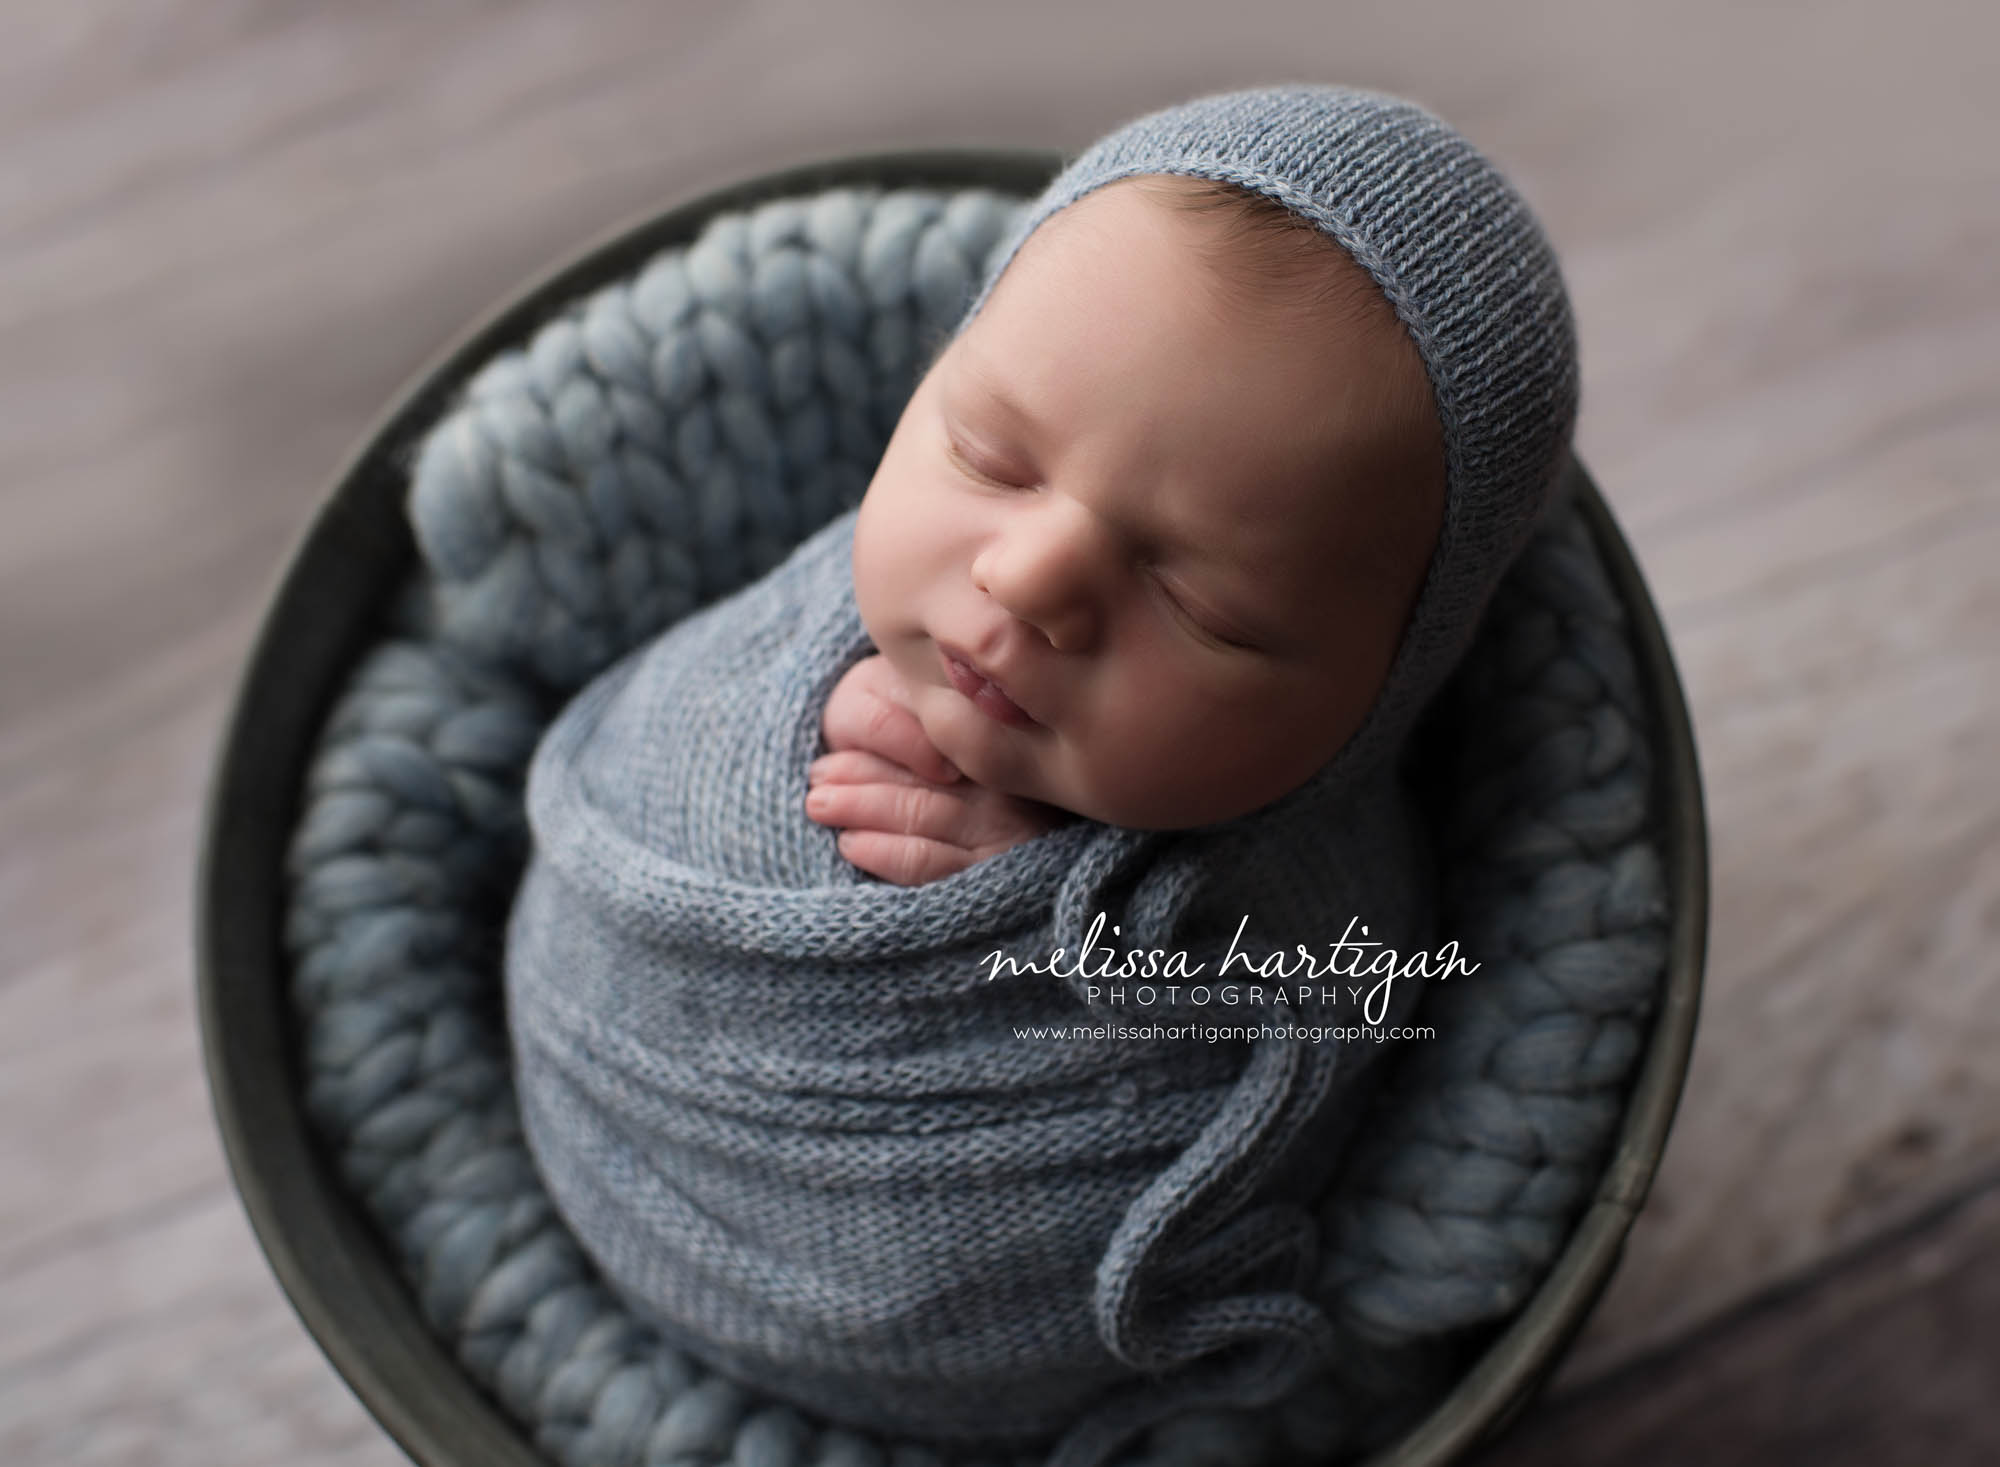 Melissa Hartigan Photography Coventry CT Simply Swaddled Newborn Session baby boy wrapped in blue knit wrap and matching hat laying on chunky blue blanket in a bucket